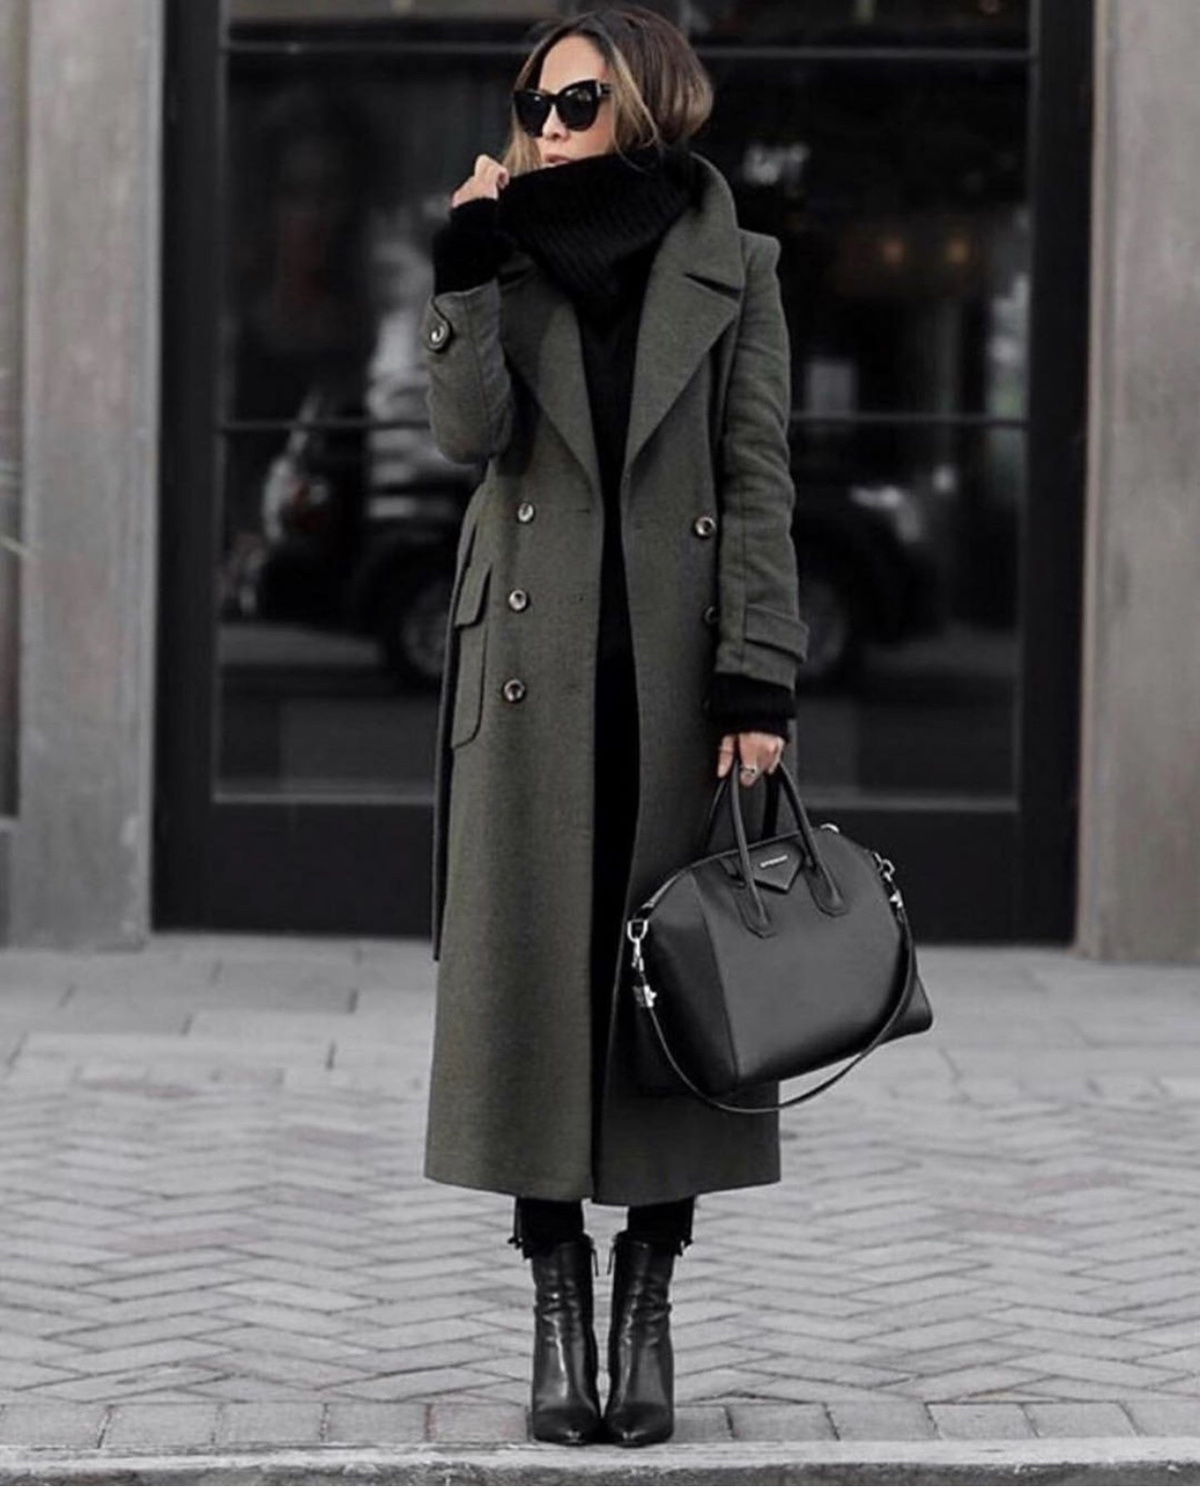 military coat for women, stylish military coat, fall outfit inspiration by lolario style | lolariostyle.com